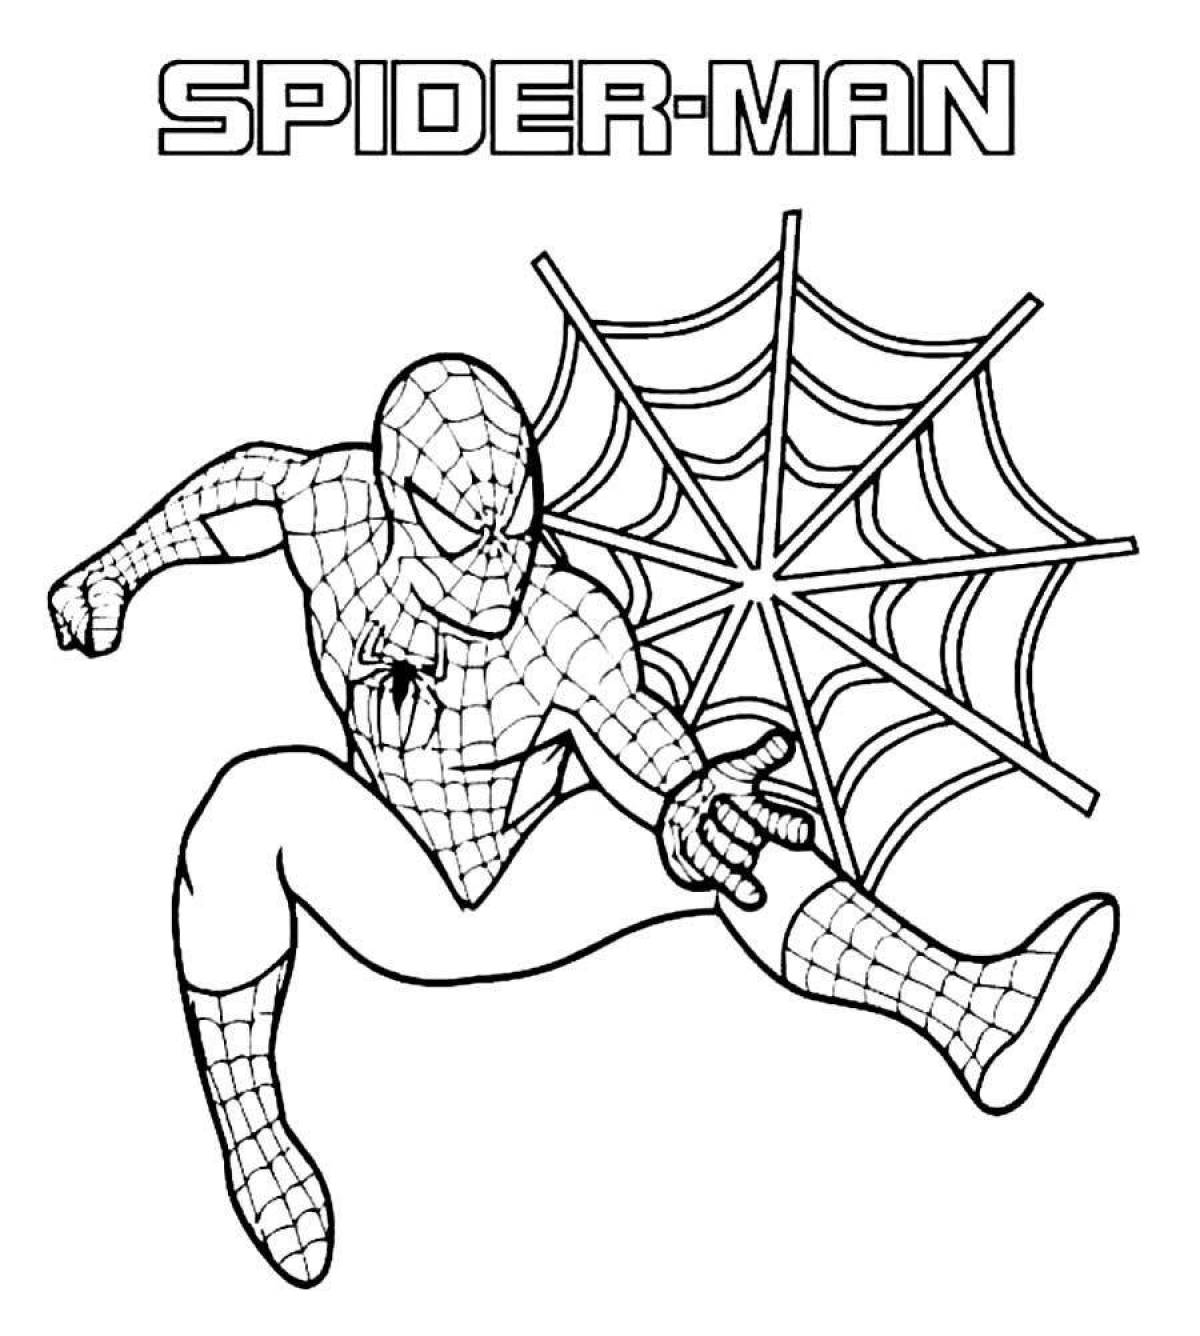 Spider-man holiday coloring book